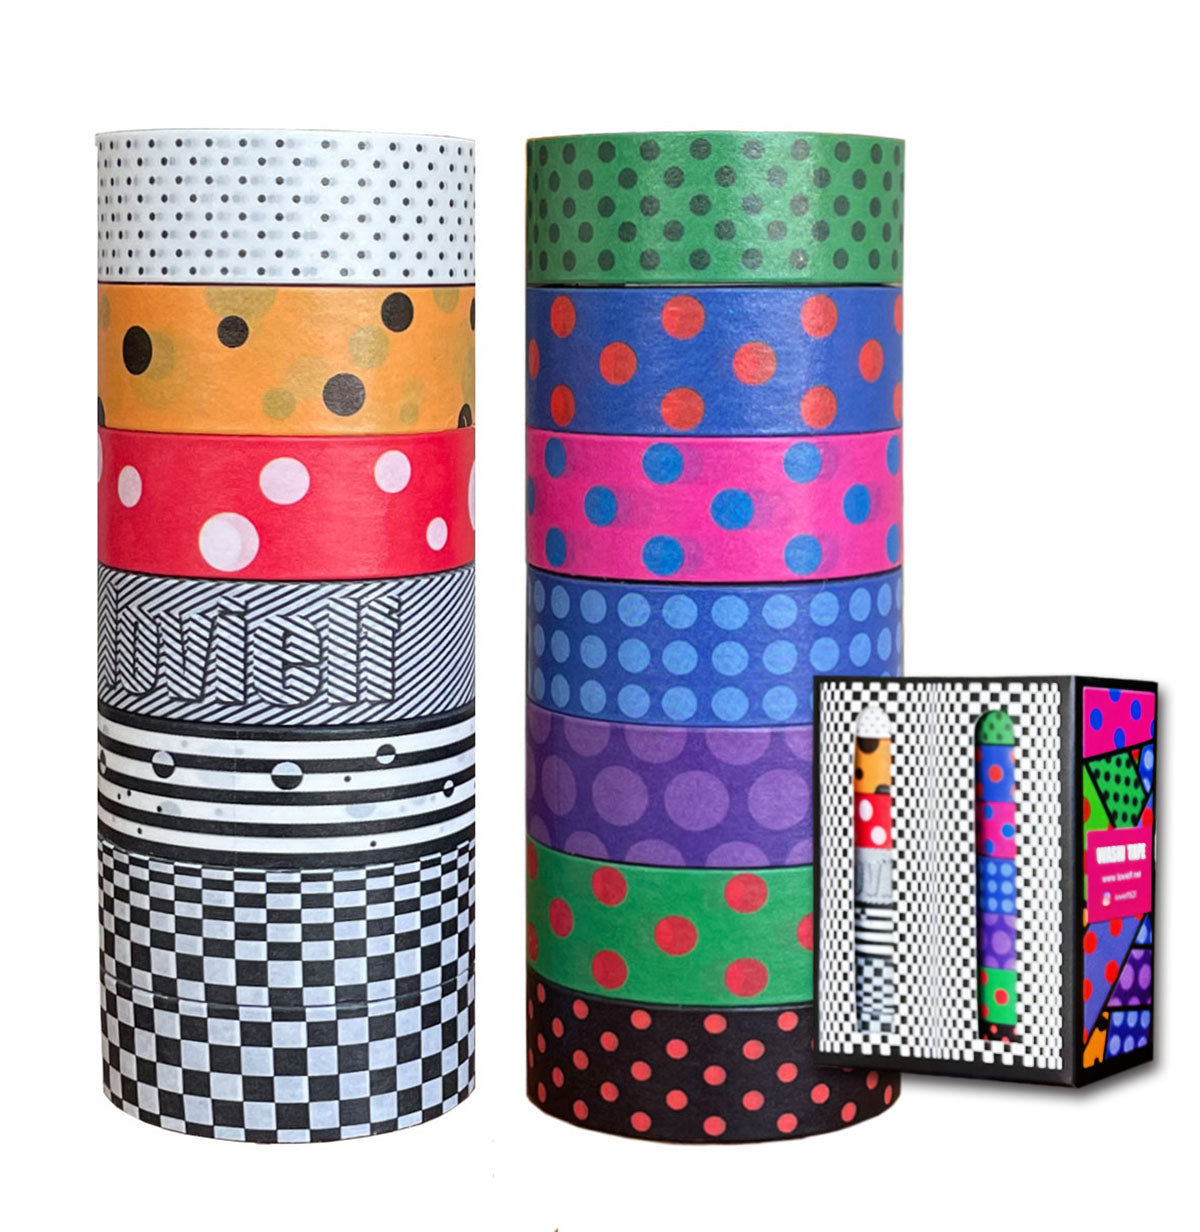 lovielf Washi Tape Set Vintage Cute Retro Colored Polka Dot Pop Op Art Black and White Aesthetic | 14 Rolls, 15mm for Craft Gift Wrapping, Planner, Journaling, Scrapbooking (Op Art + Polka dot A)